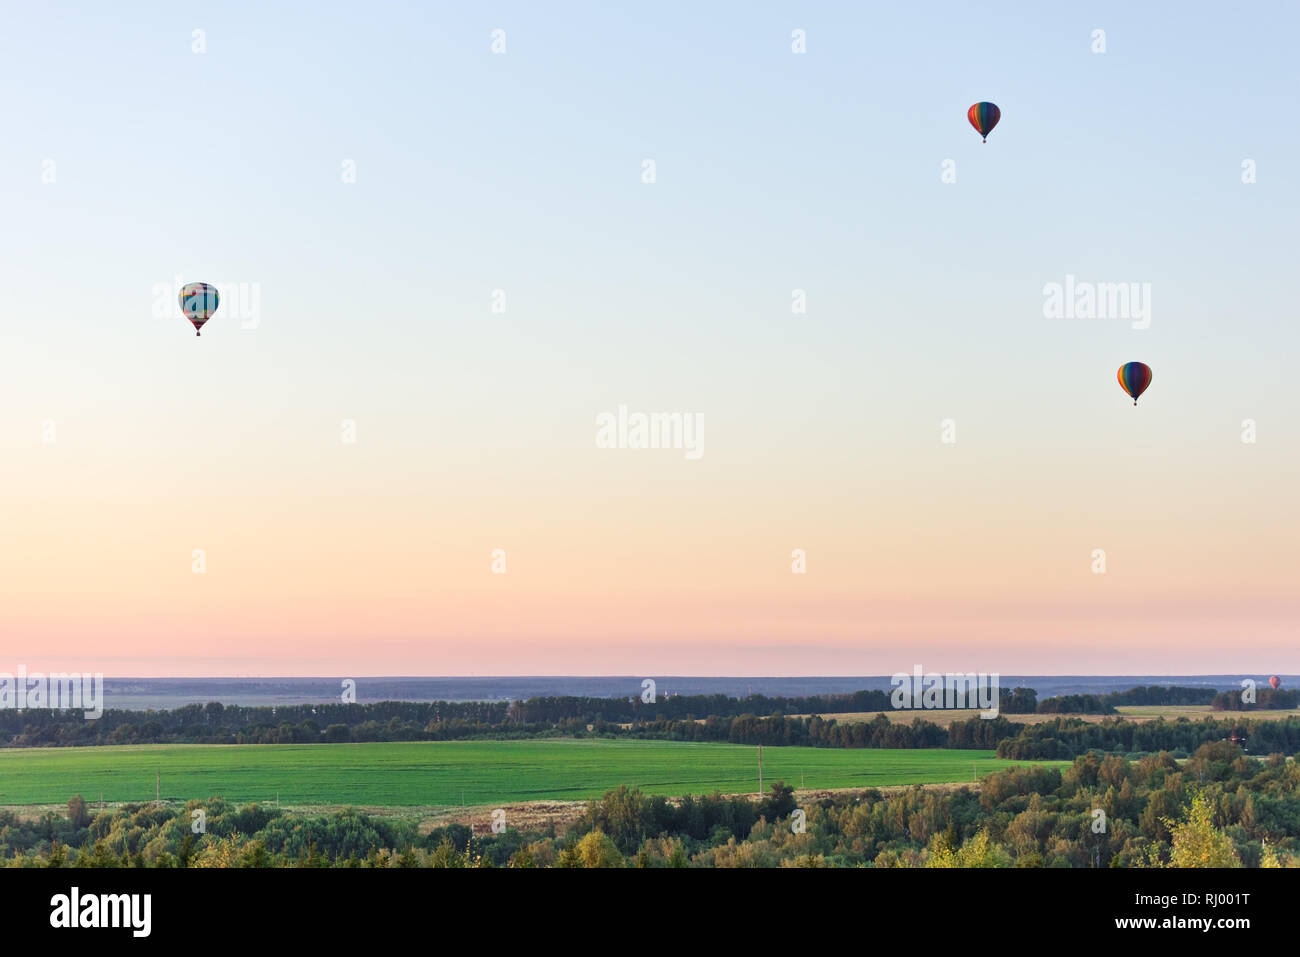 Flying in a balloon. Three objects in the air against a cloudless sky. Evening landscape Stock Photo